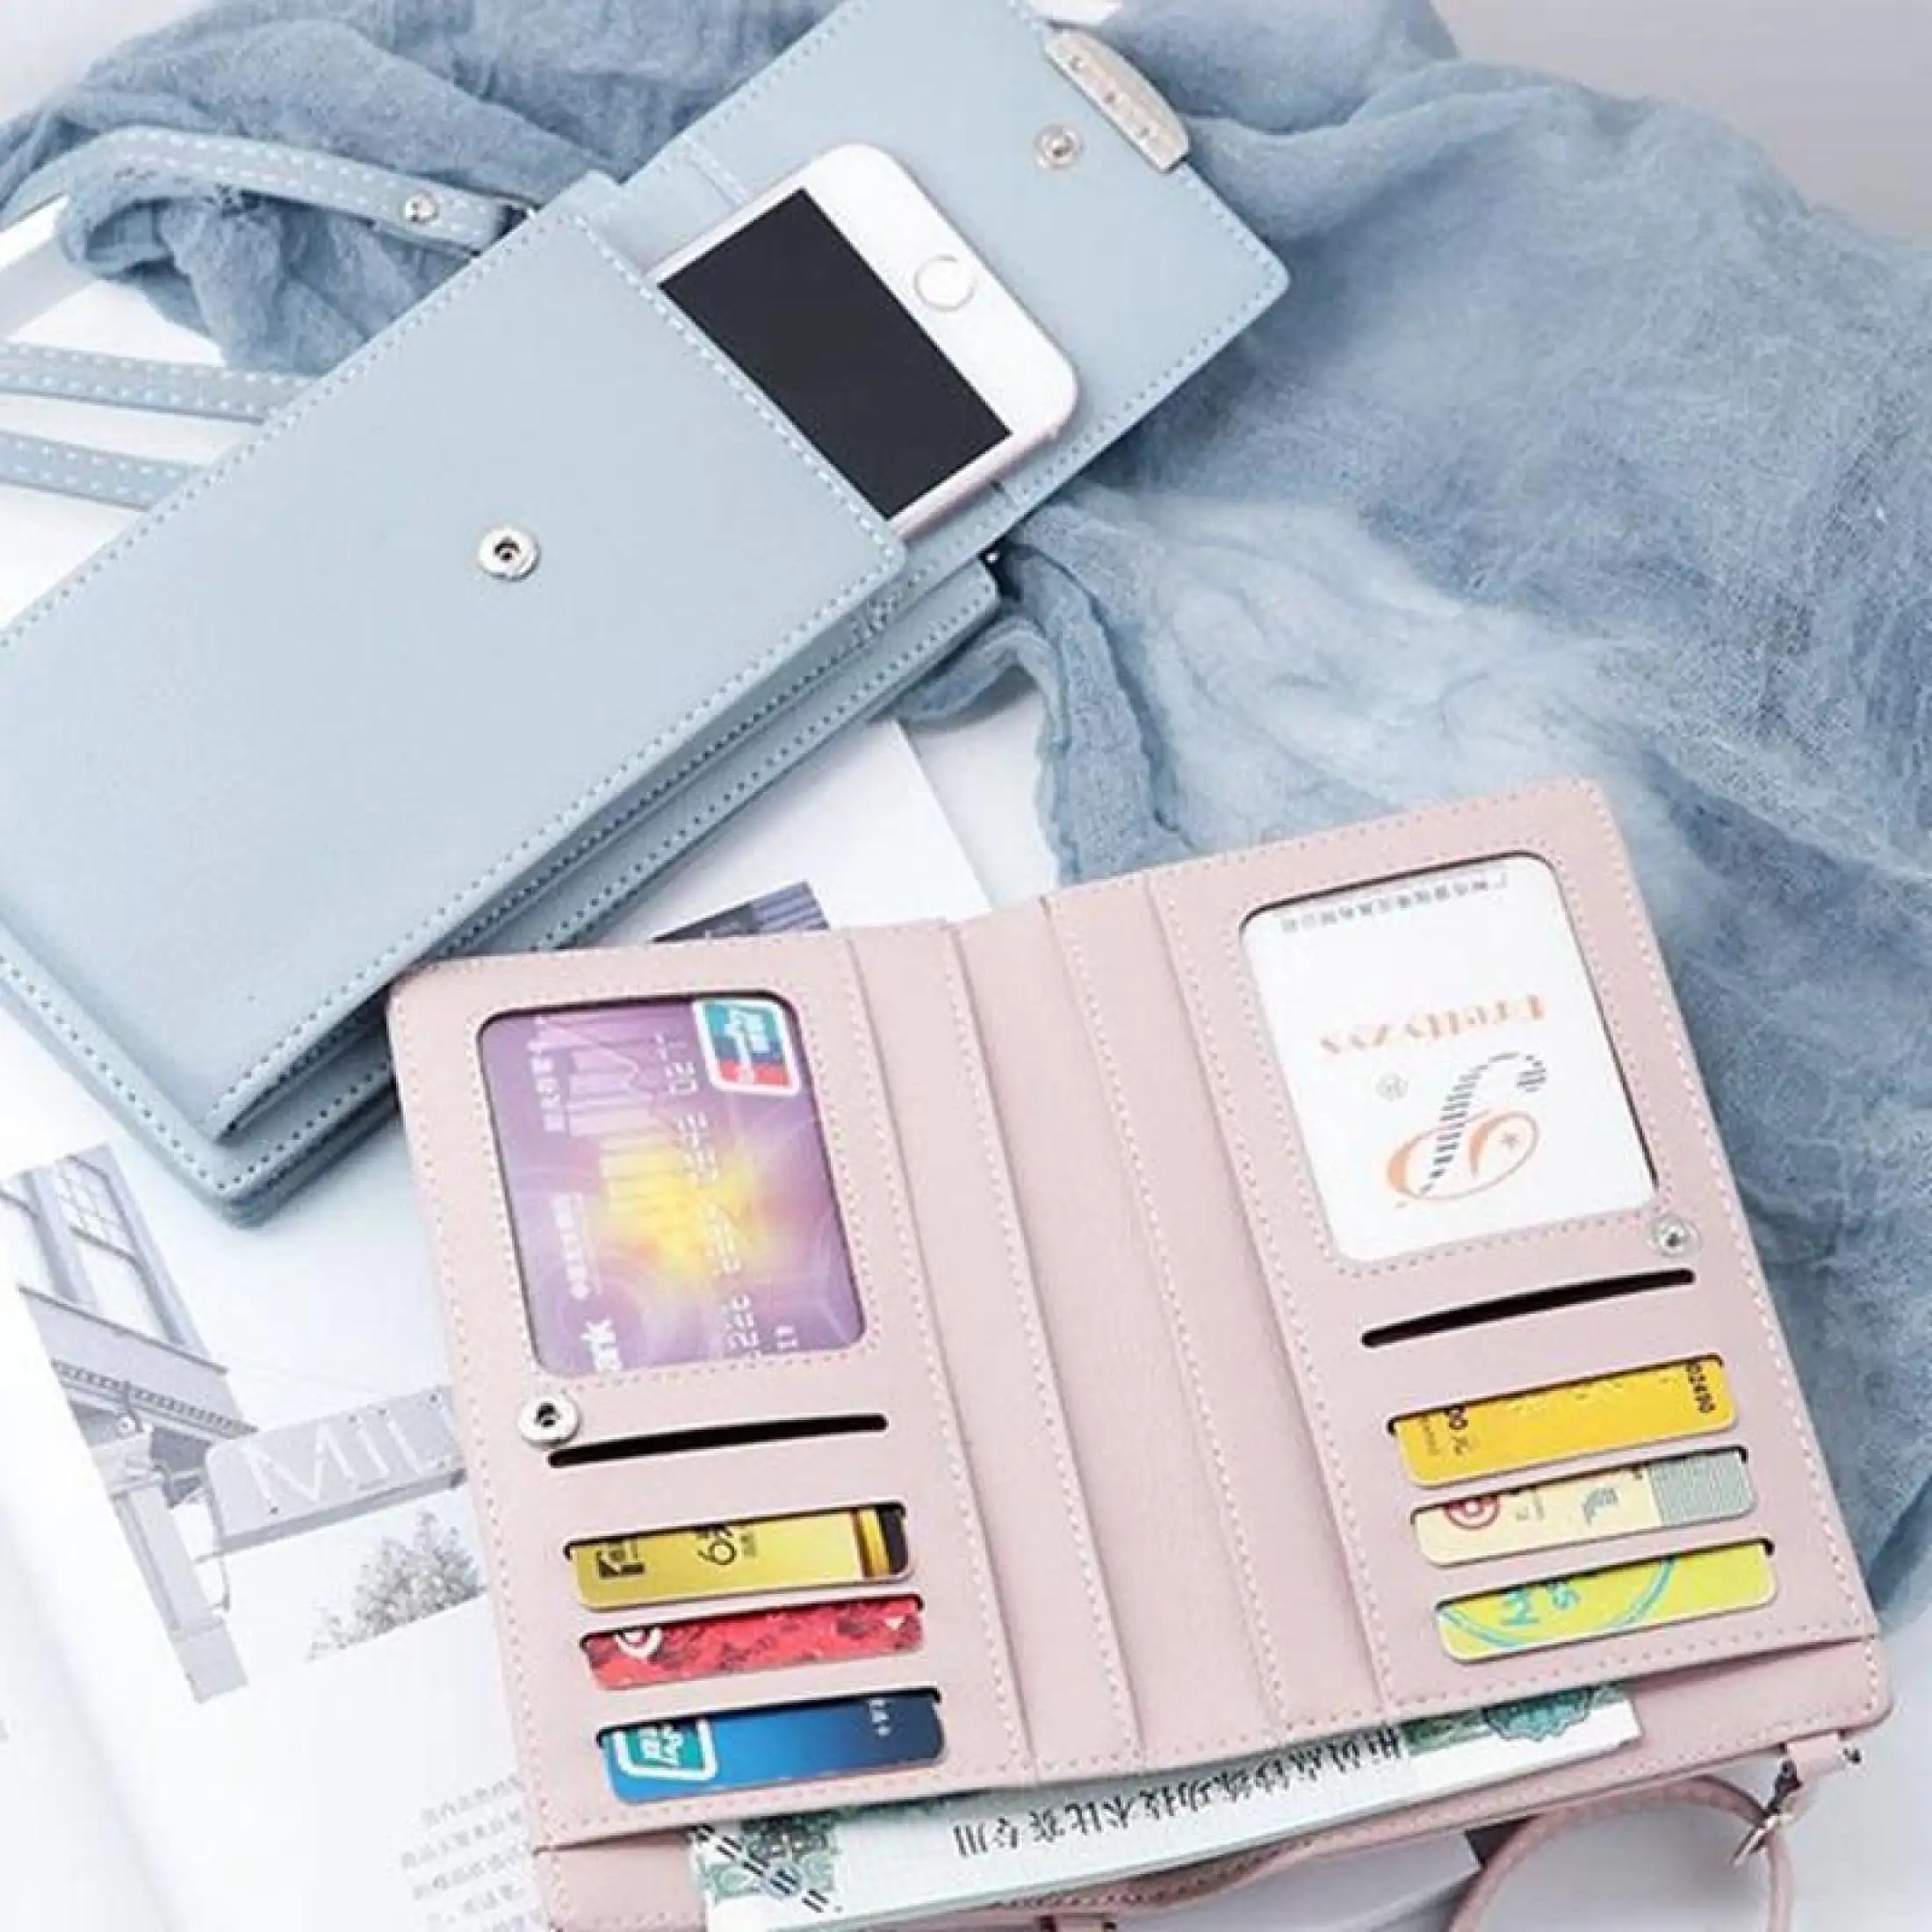 Women Multifunctional Large Capacity PU Leather Phone Purse Wallet Card  Holder Clutch Purse Crossbody Bag Handbags Shoulder Bags for Under 5.5 Inch  Smartphone | Lazada Singapore